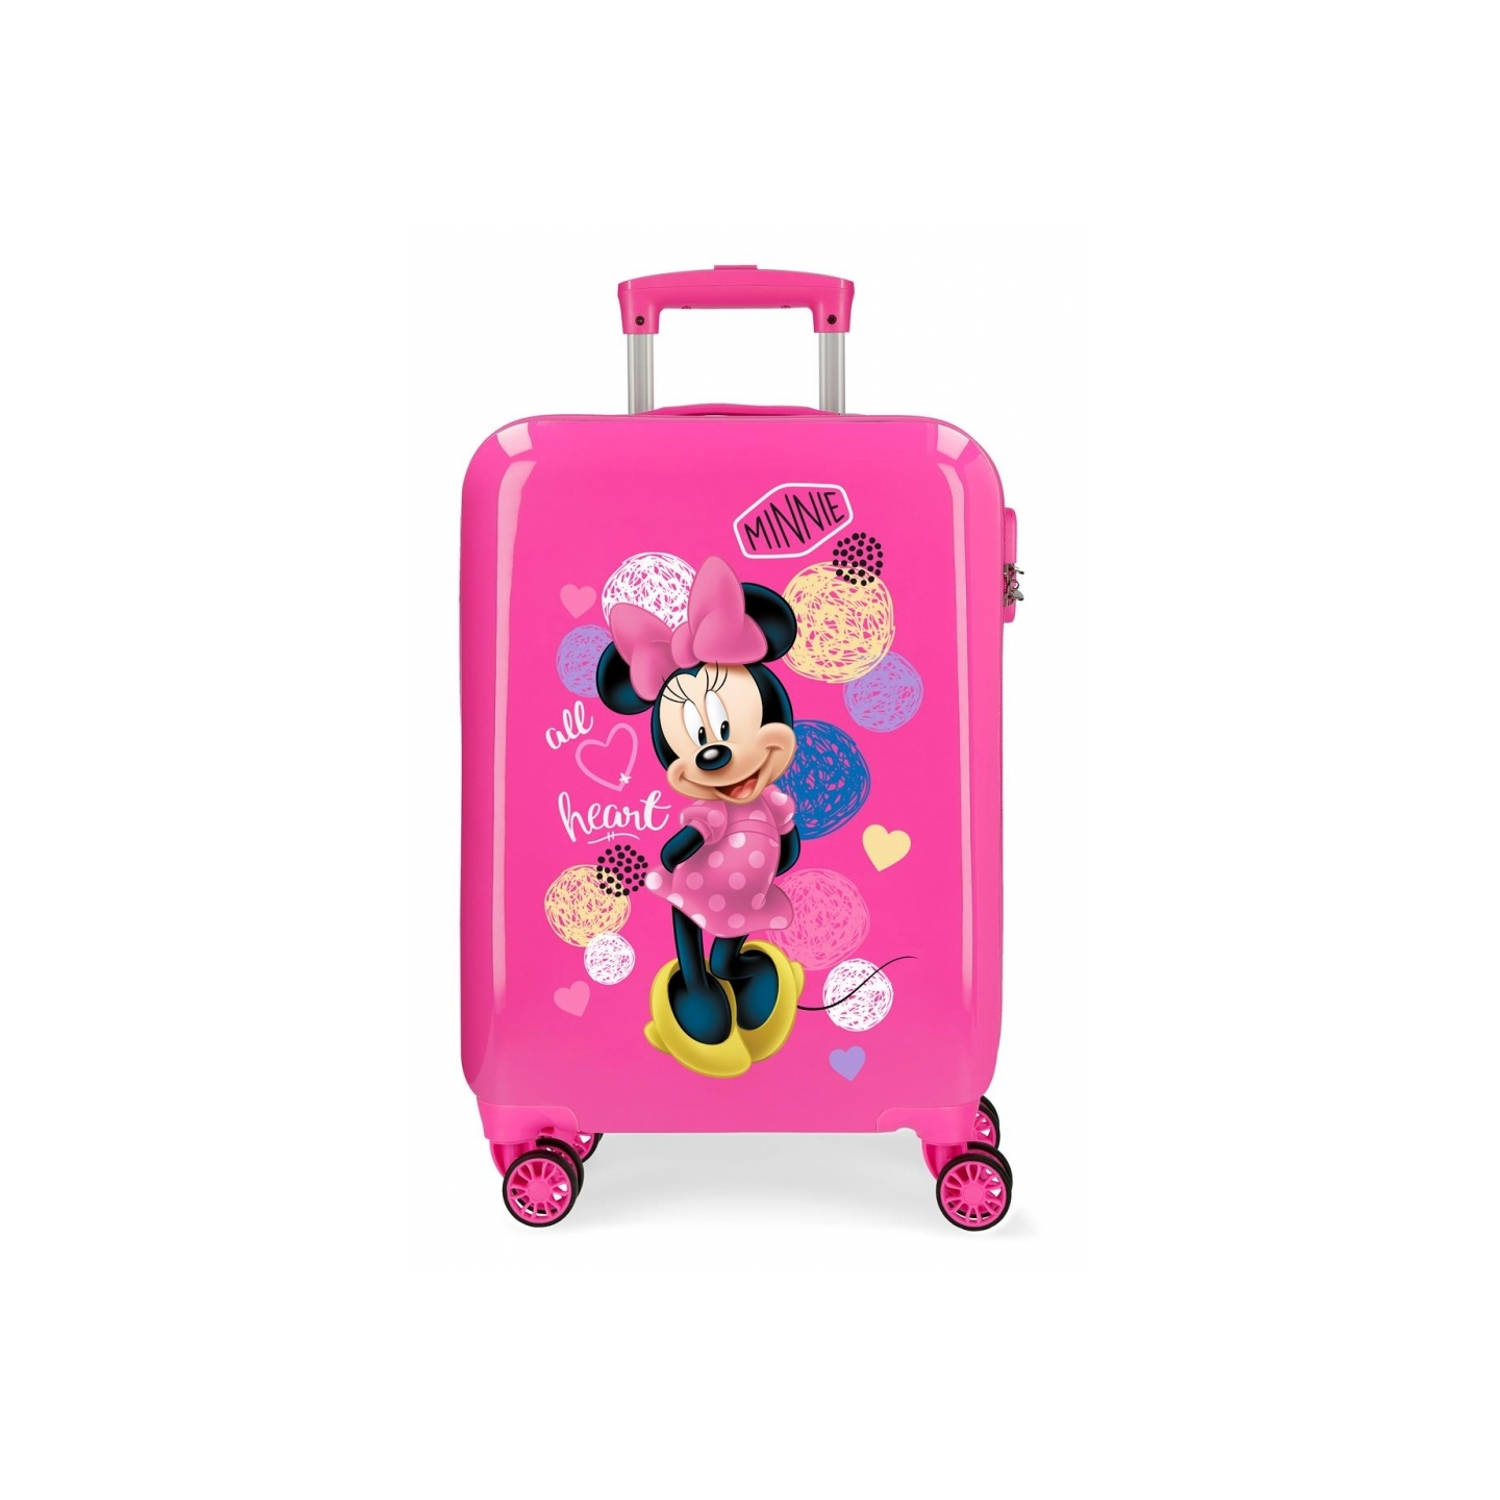 Disney kinderkoffer Minnie Mouse 33 liter ABS 55 cm roze